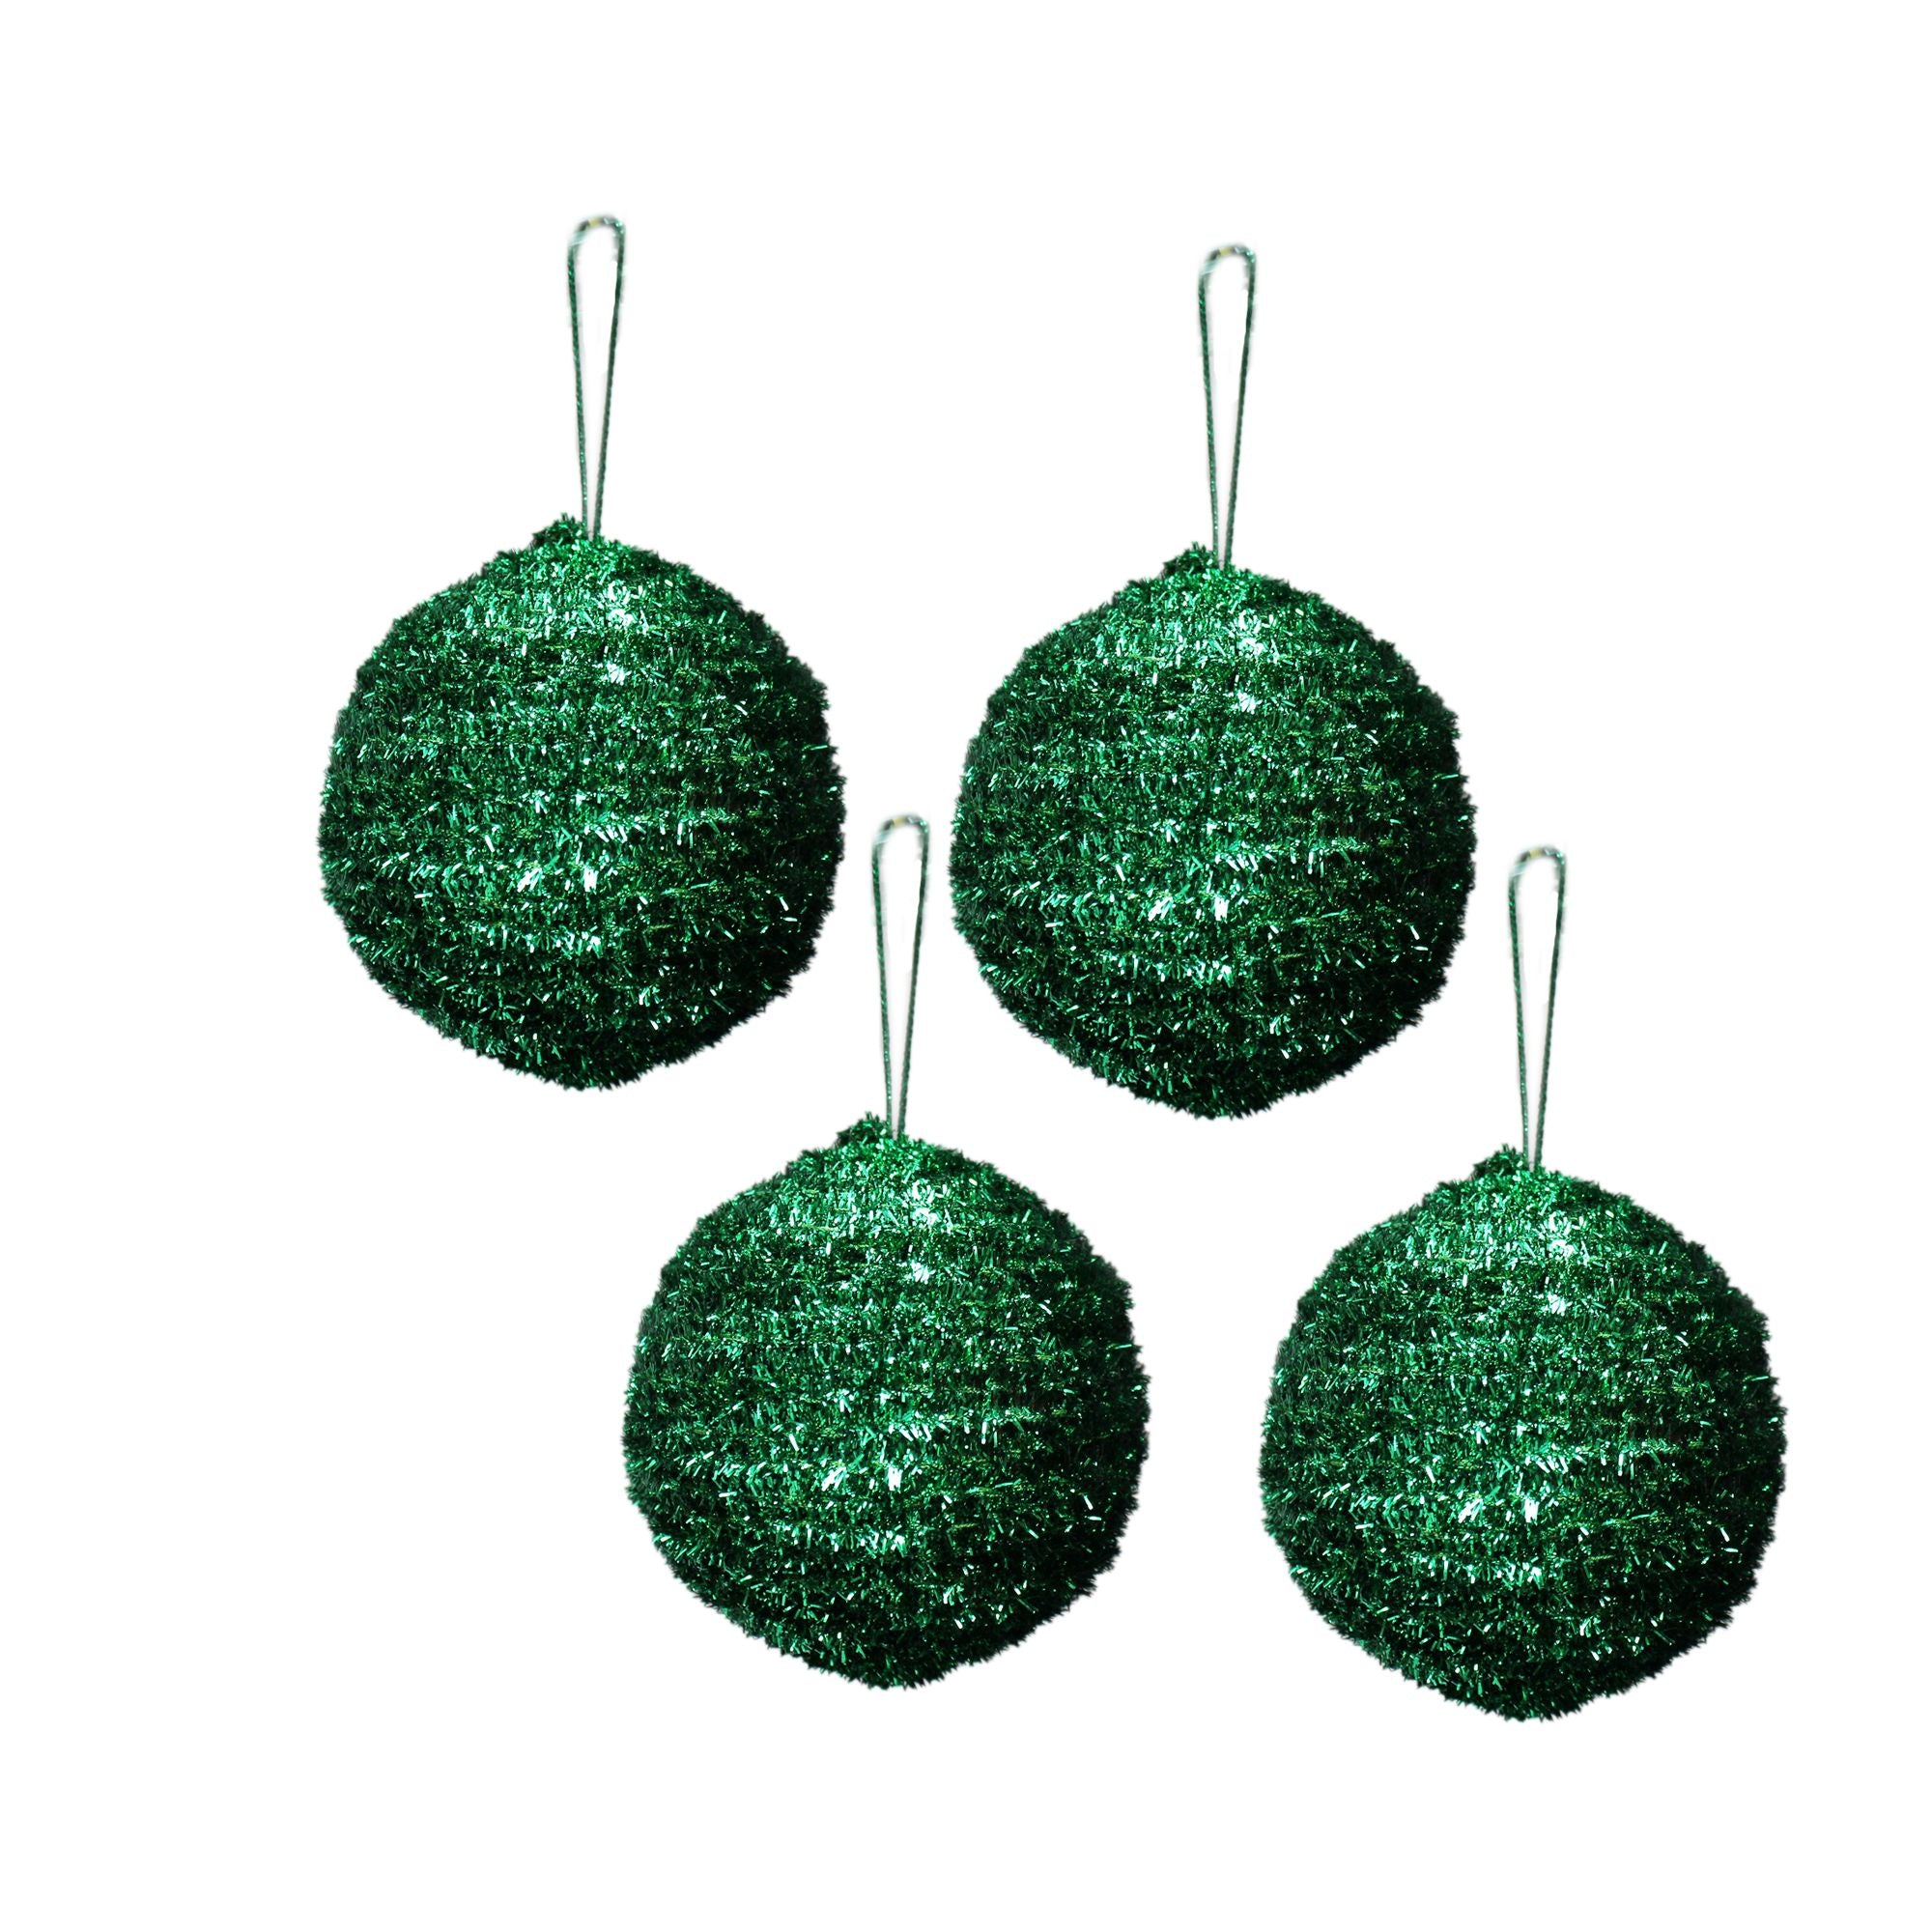 Handmade Christmas Ornaments - Tinsel Baubles, 60mm, Green, 4pc